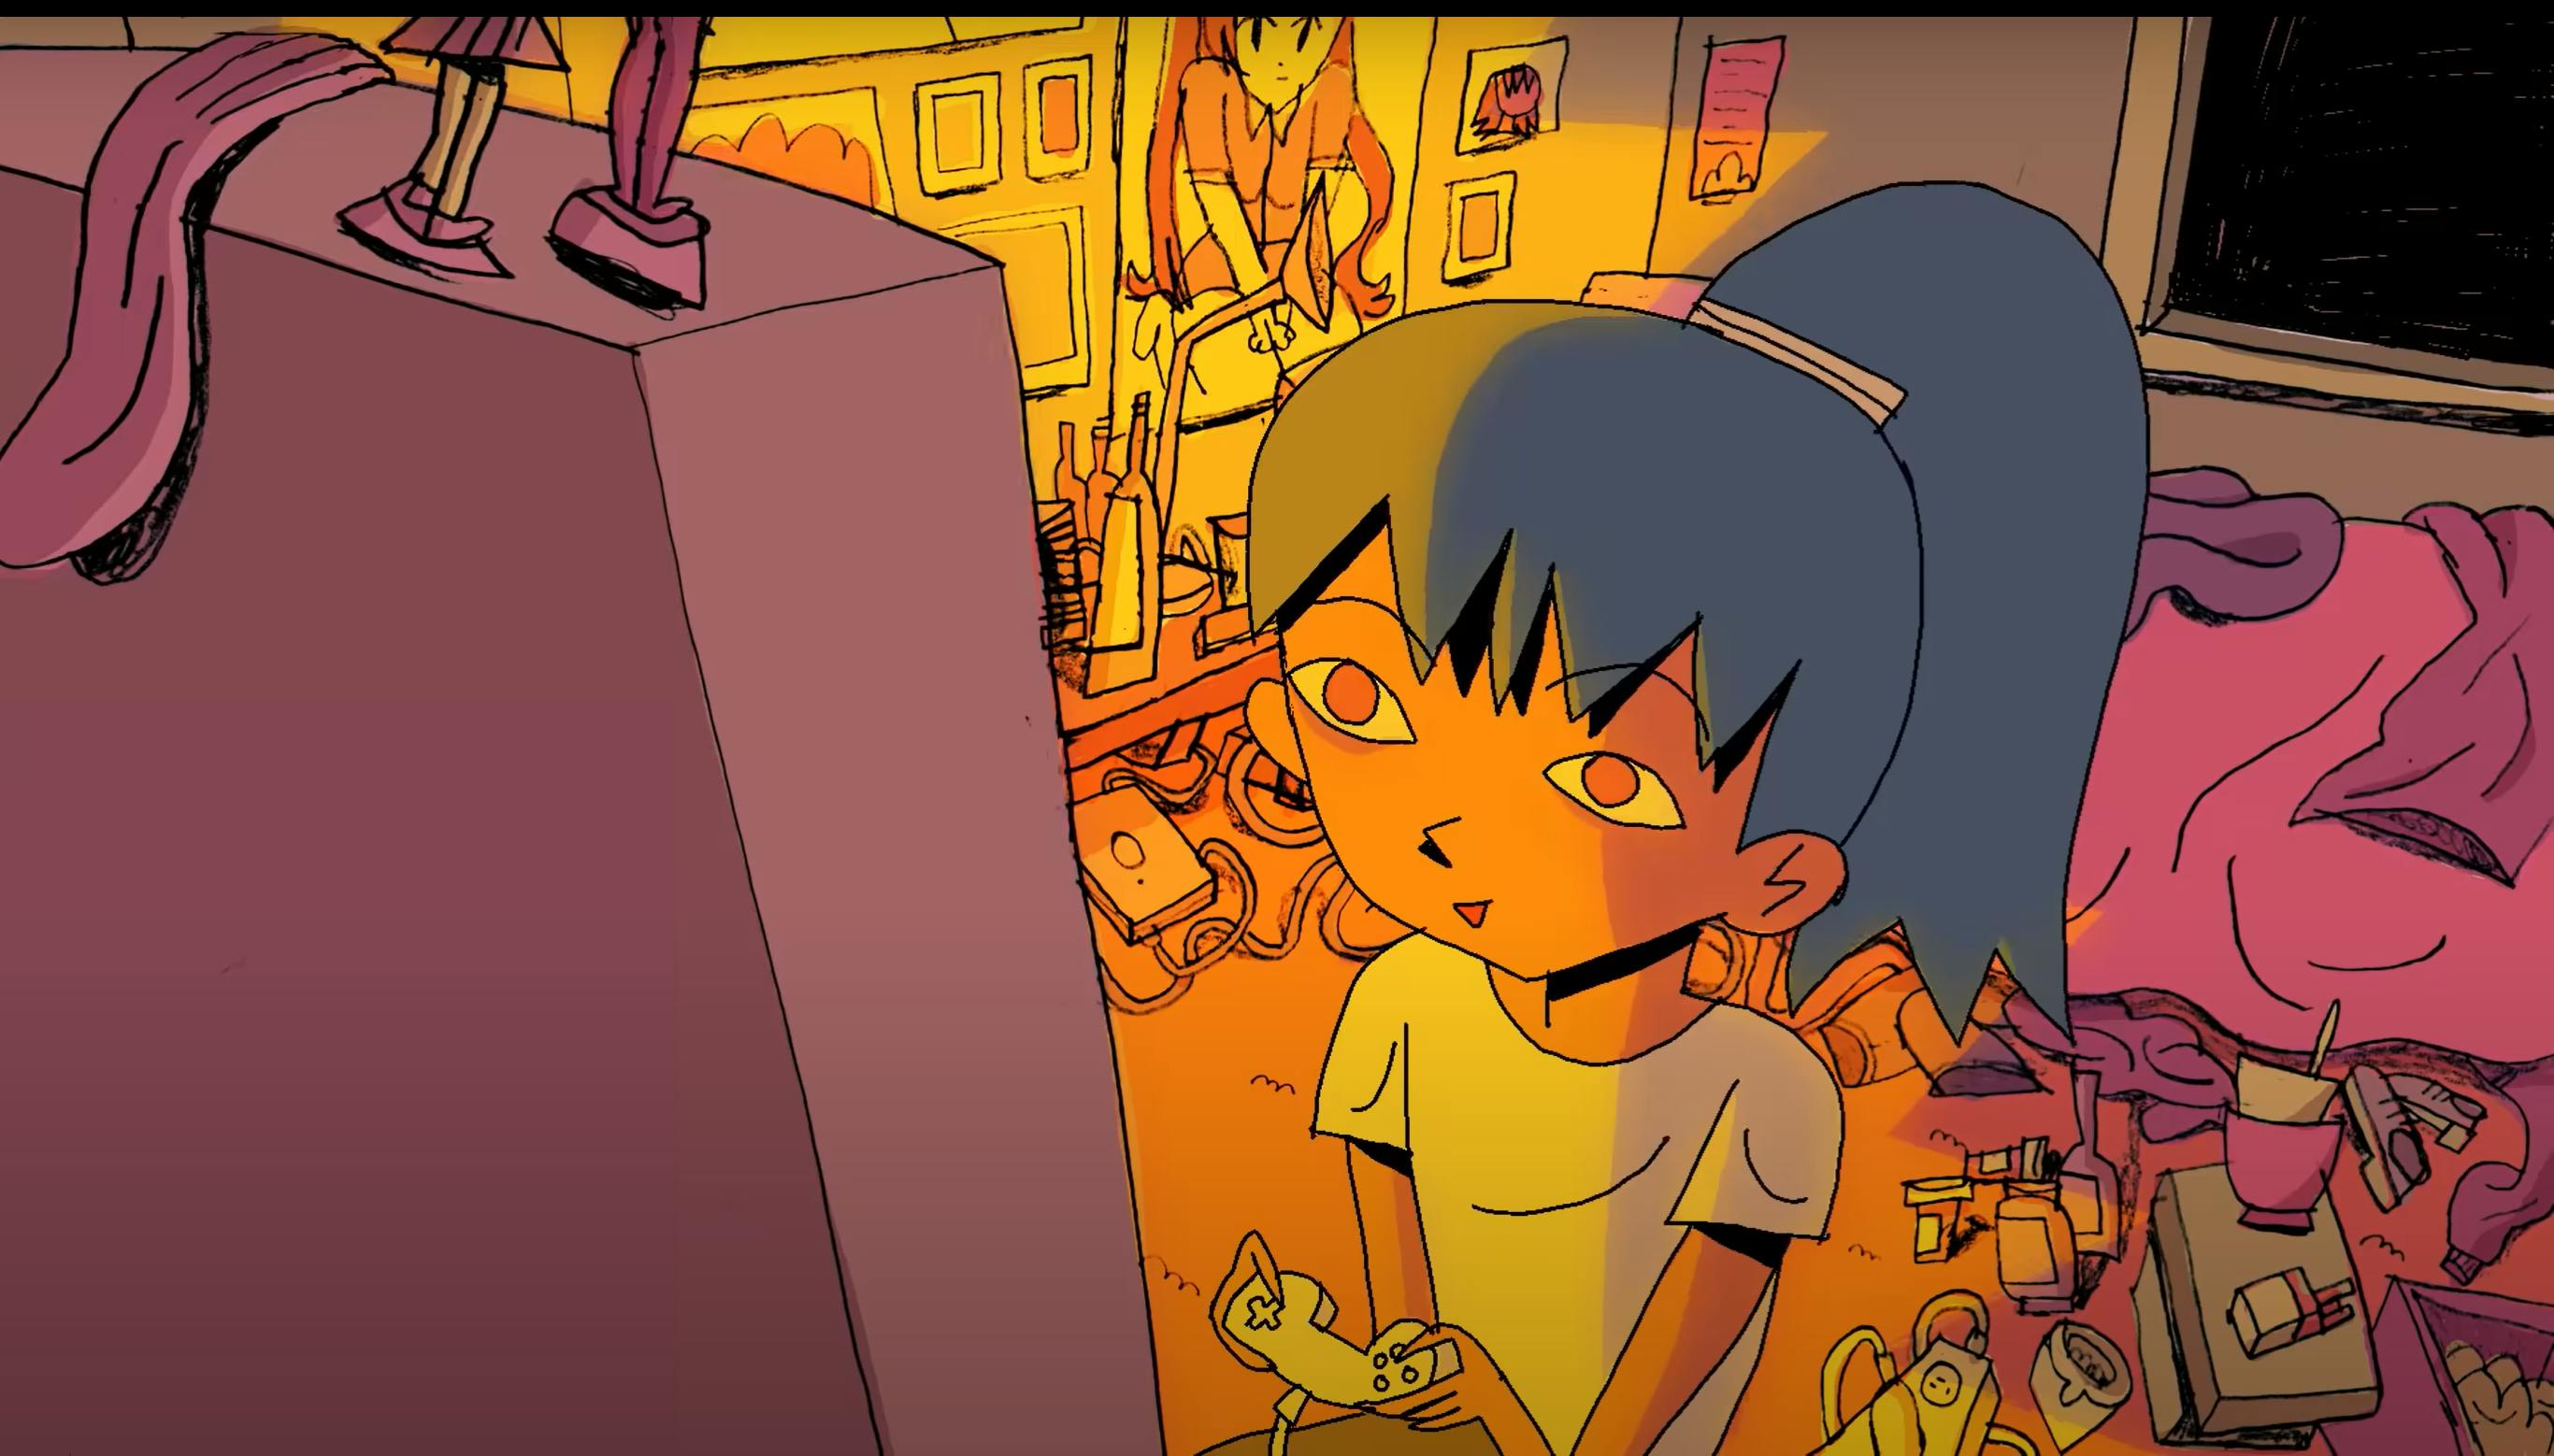 Screenshot of Victoria Vincent's Floatland (2018)
Image of a girl looking at a screen to the left of the frame. She has blue long hair in a ponytail and is holding a game controller. Behind her is a dirty room filled with clothing, bottles, posters, empty bowls, cigarettes and prescription bottles